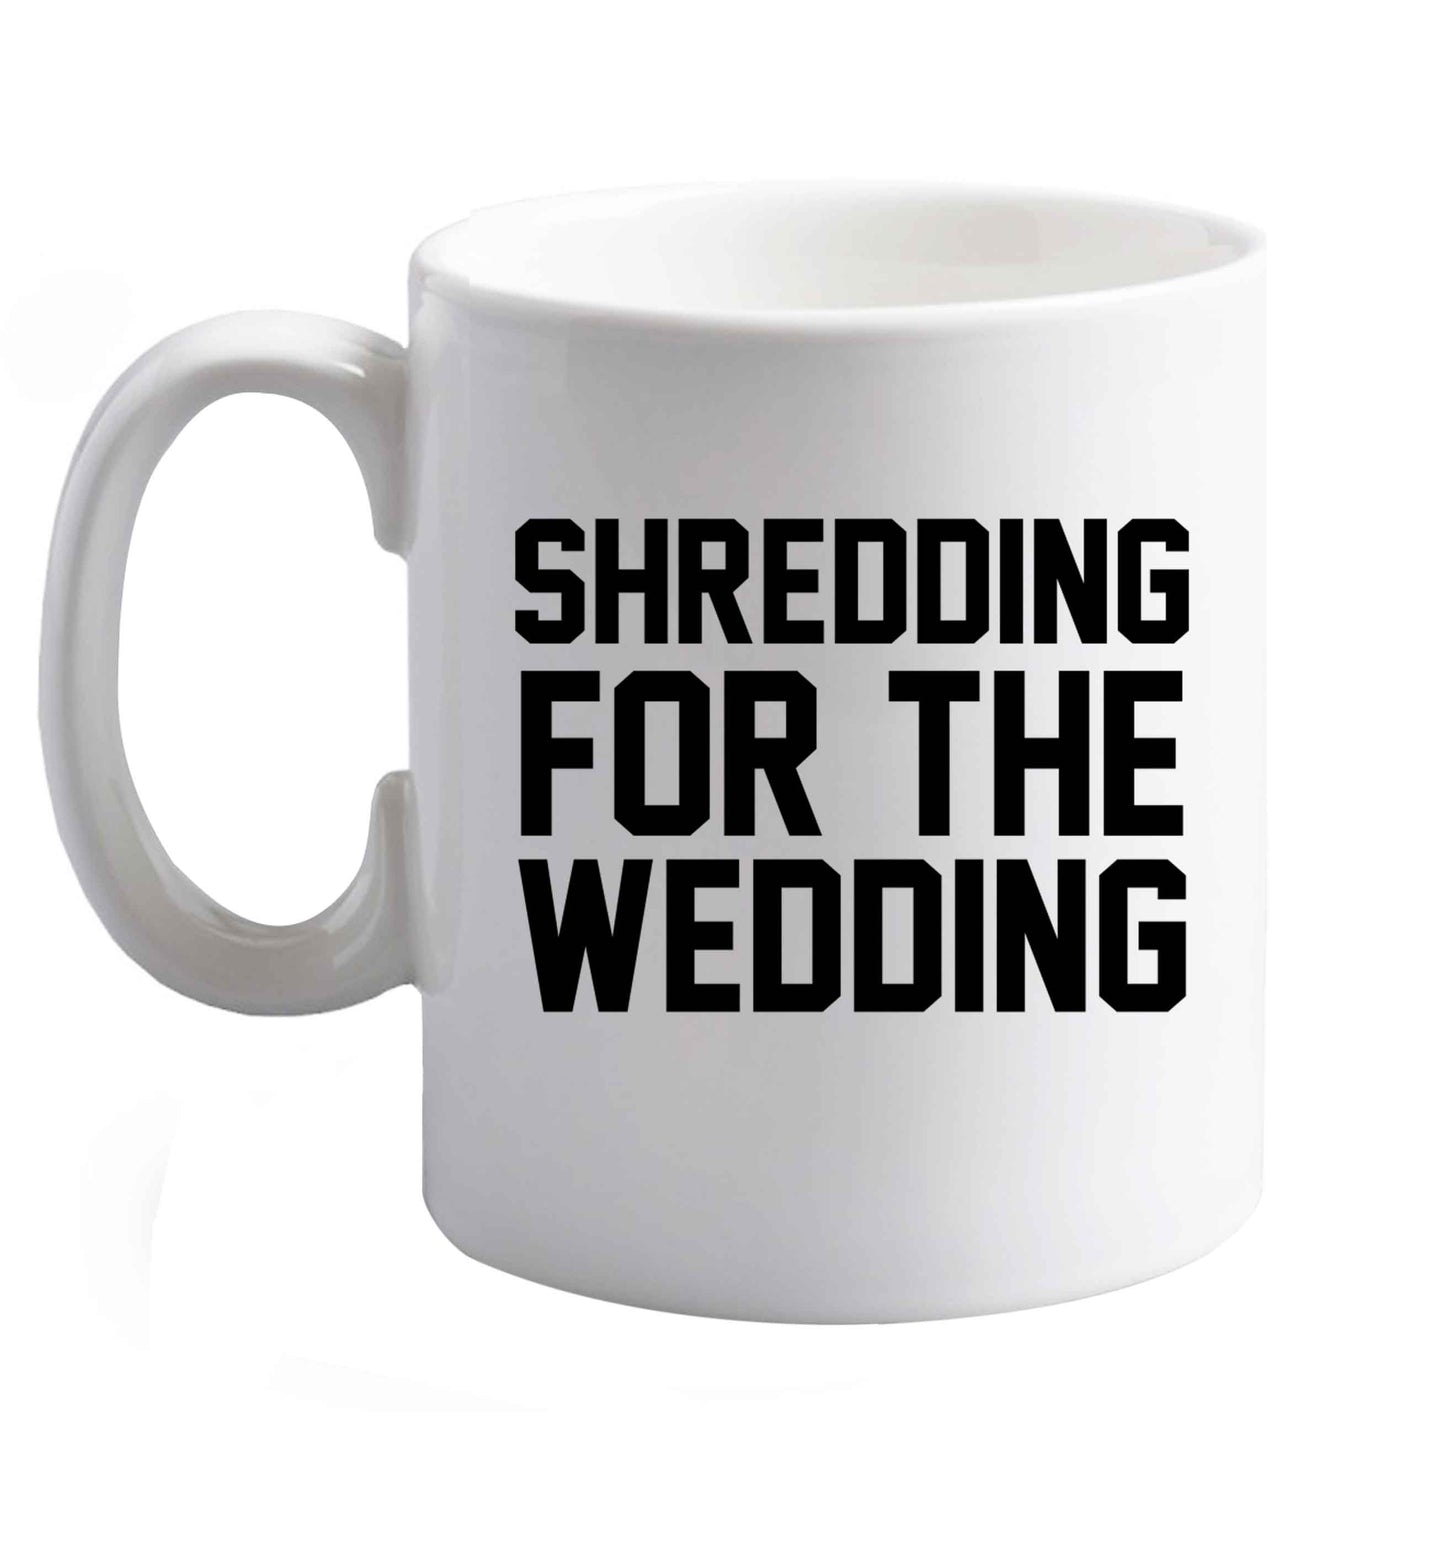 10 oz Get motivated and get fit for your big day! Our workout quotes and designs will get you ready to sweat! Perfect for any bride, groom or bridesmaid to be!    ceramic mug right handed